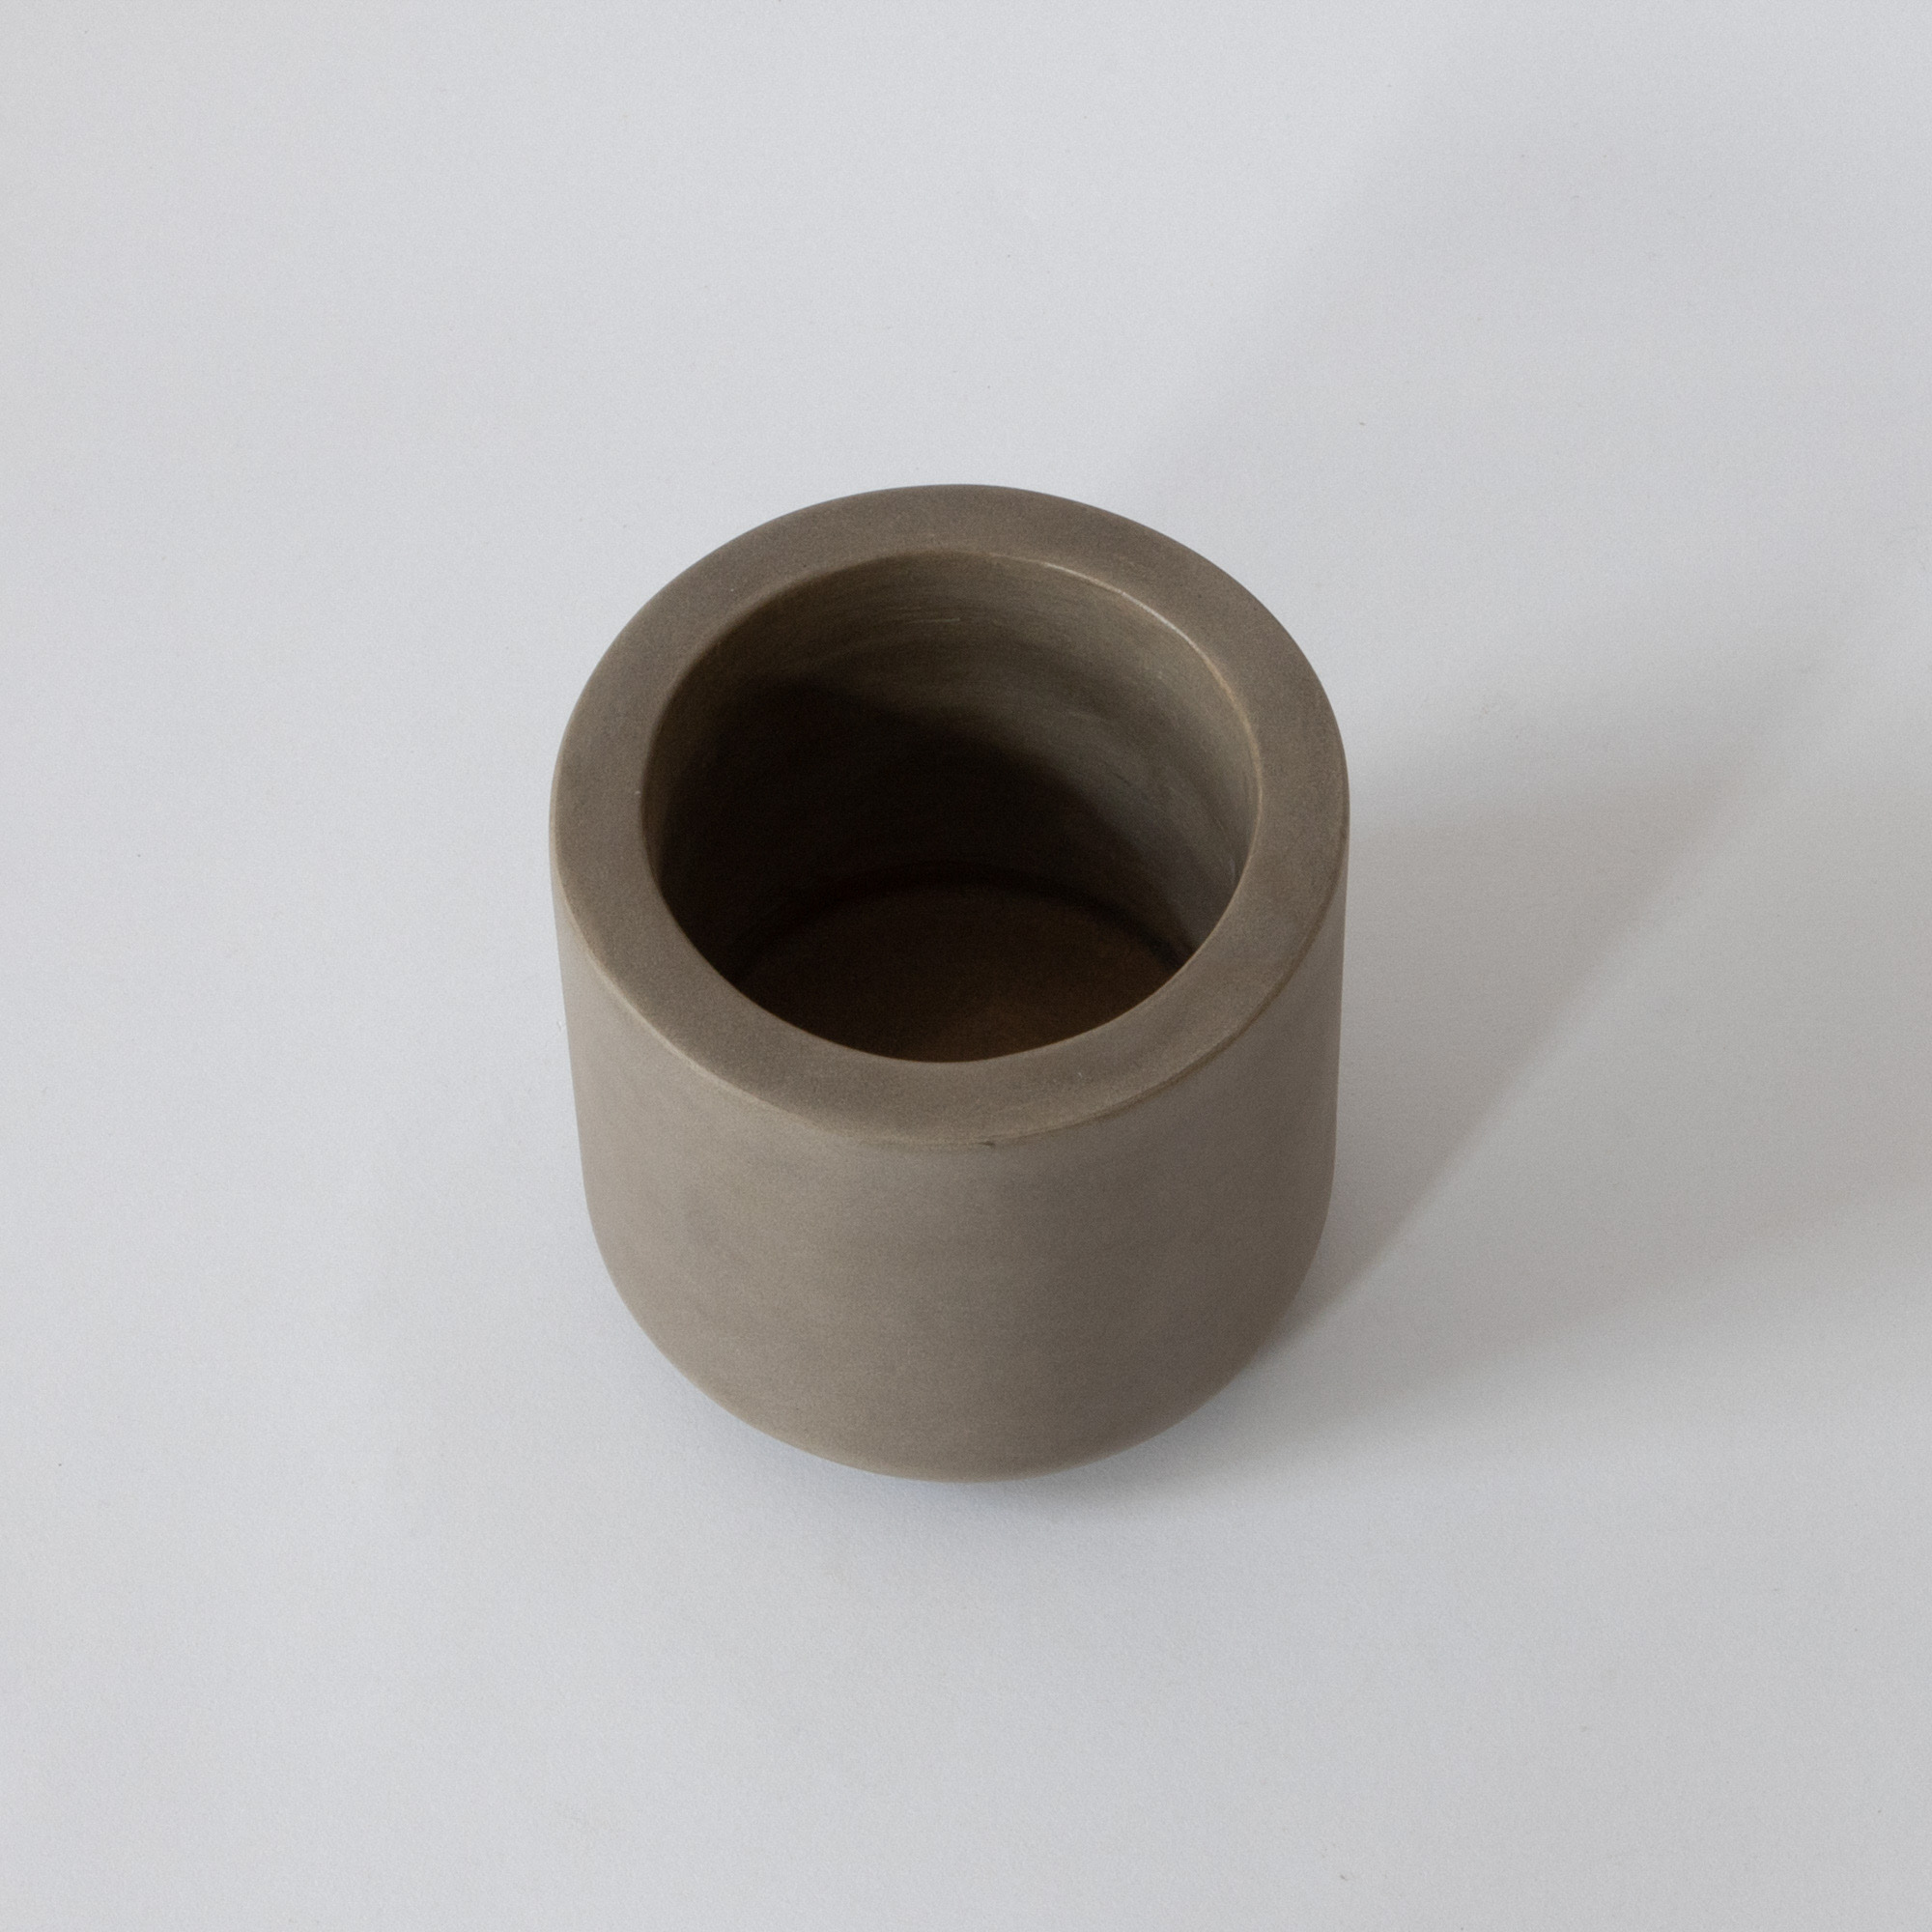 Peru Cylindrical Concrete Table Accessory